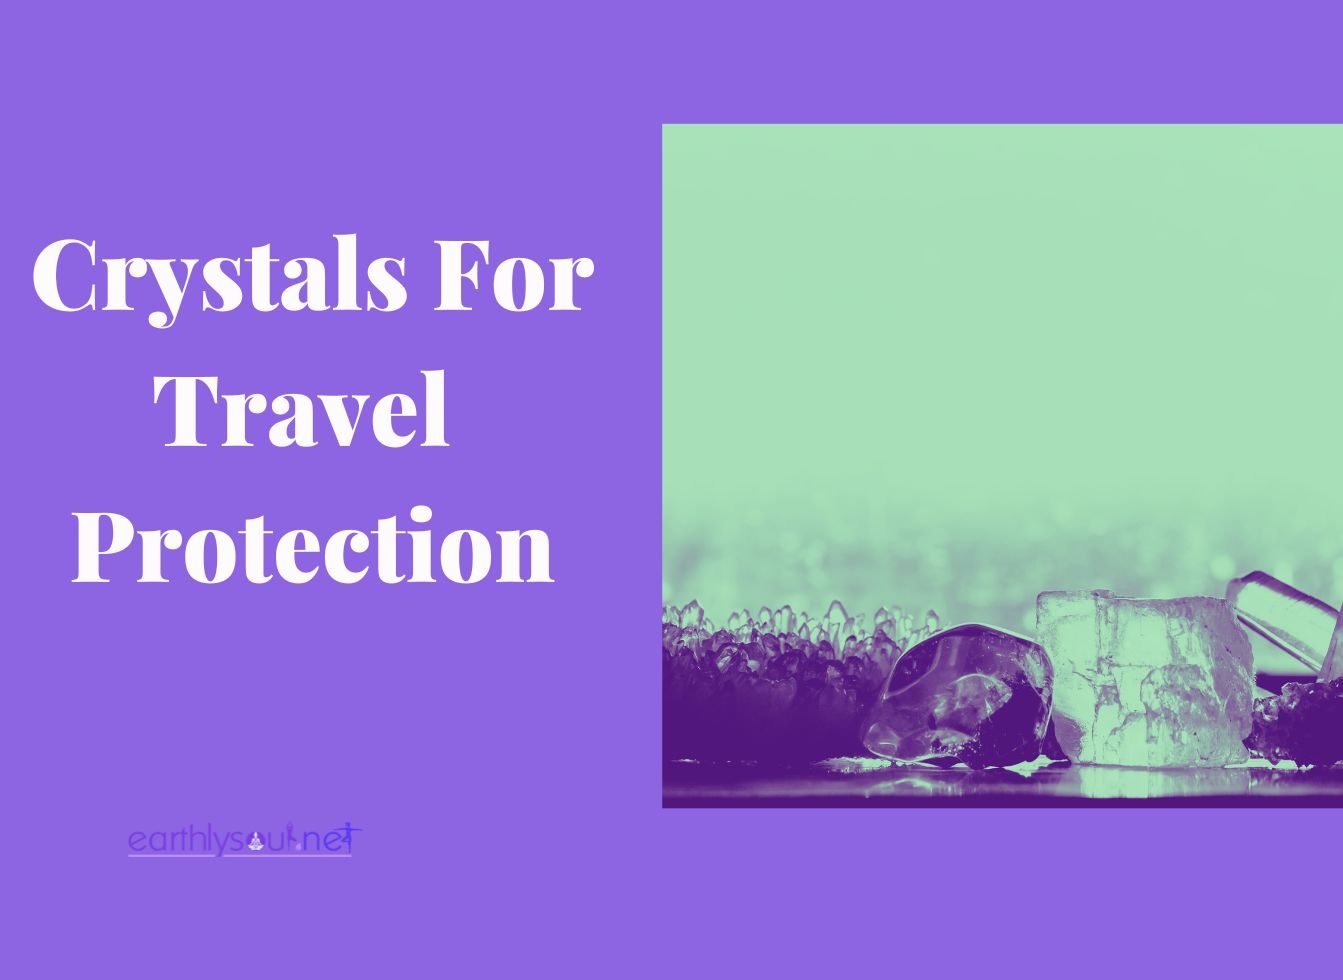 Crystals for travel protection featured image